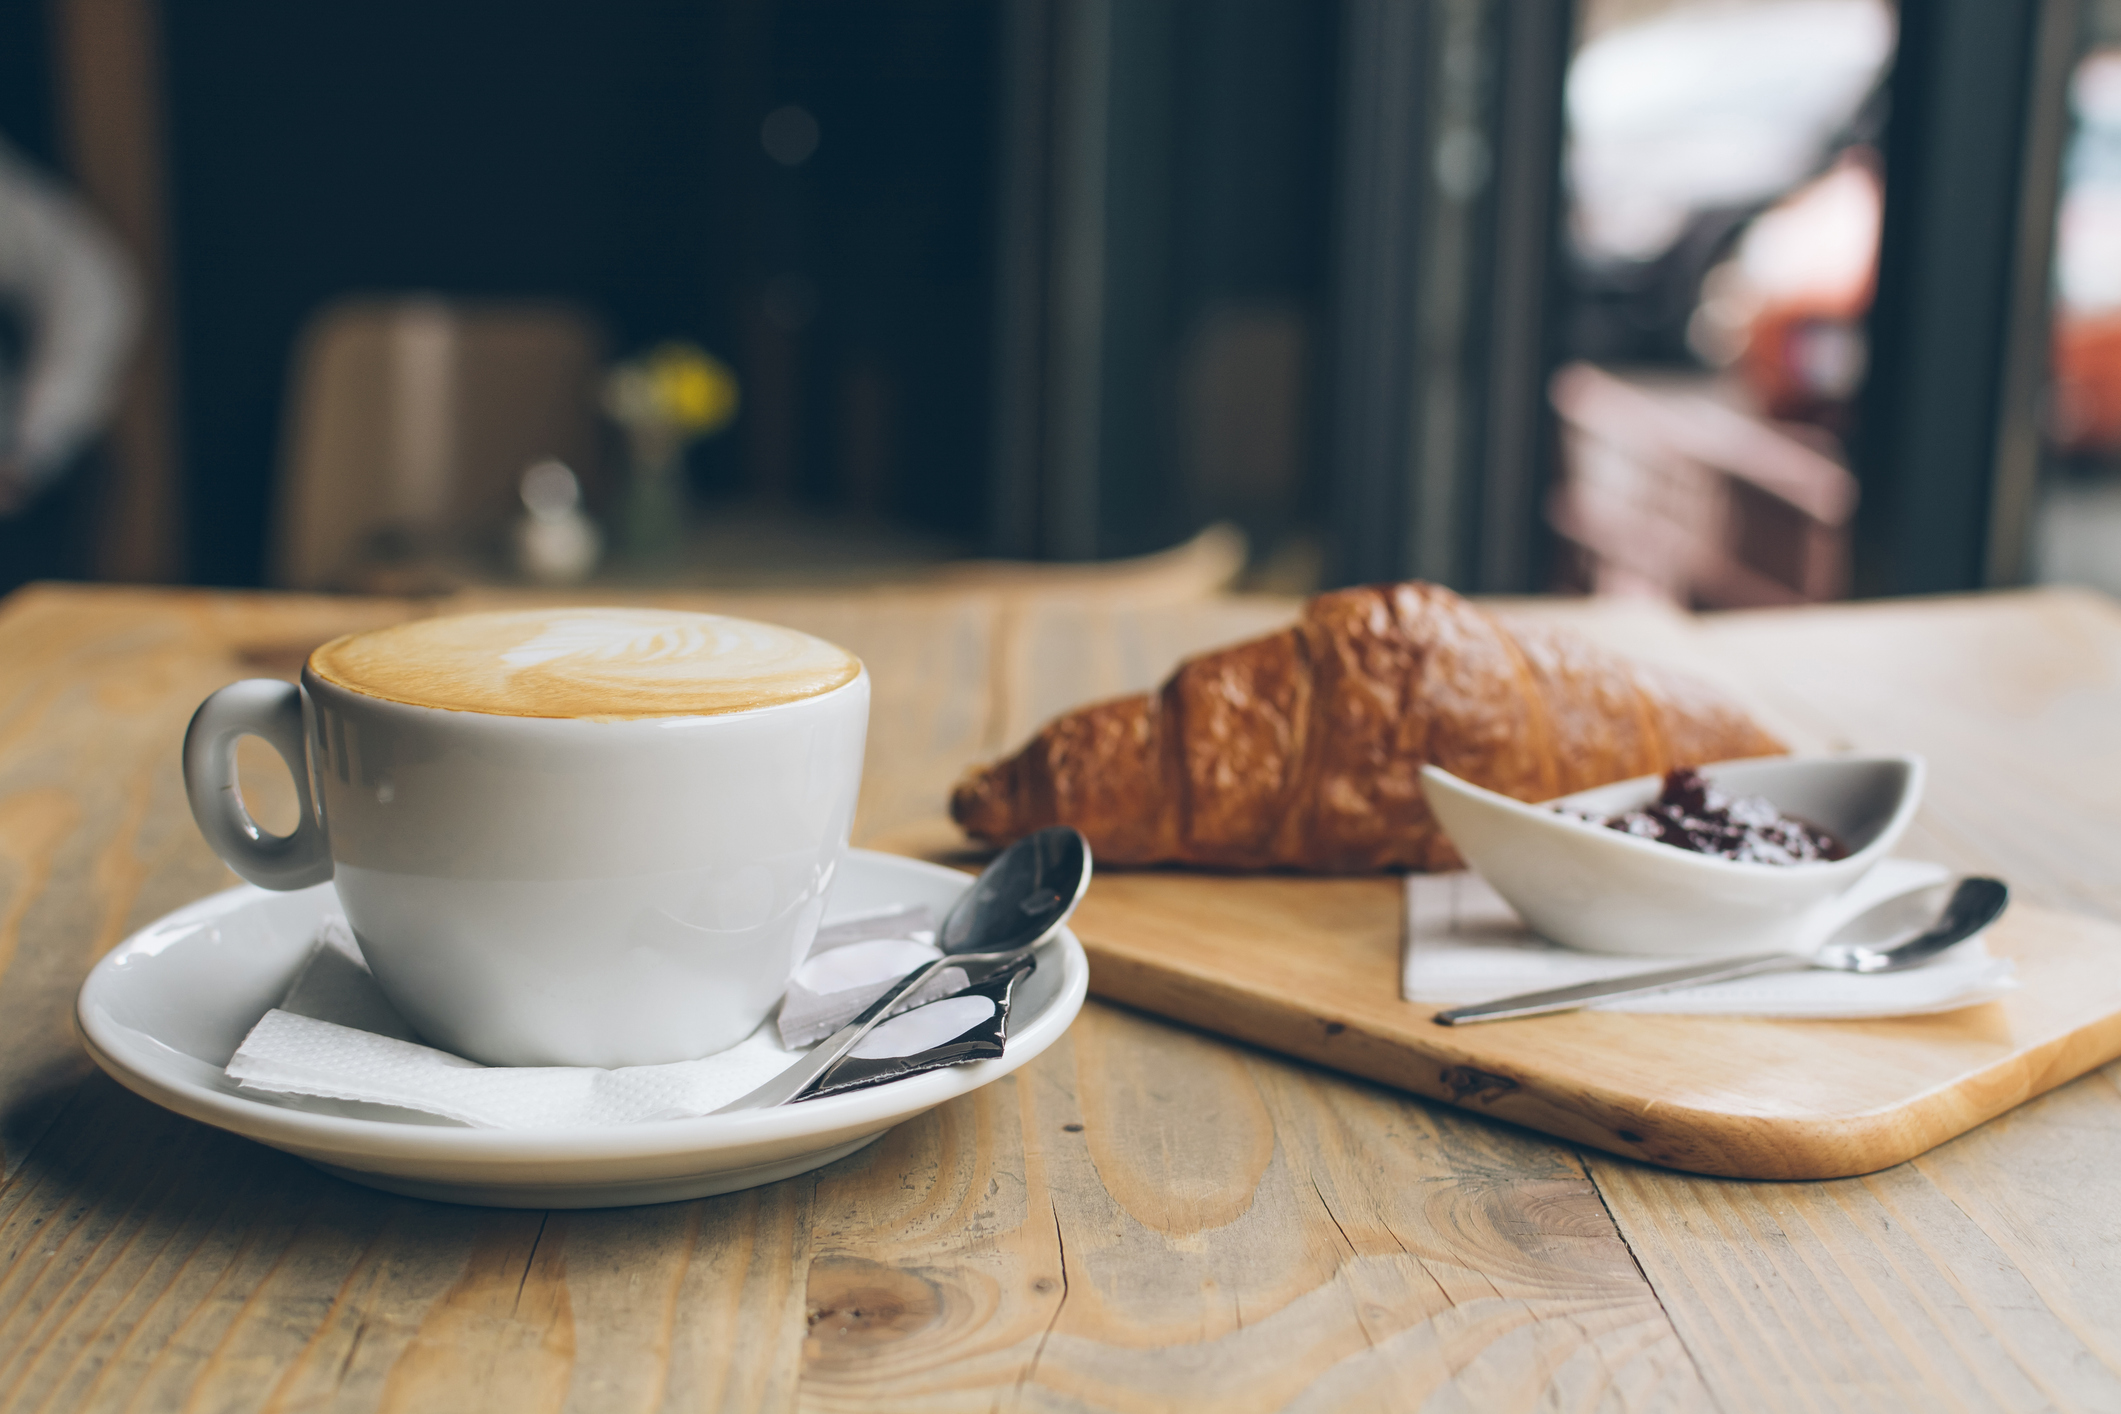 Coffee, Croissant and jam on a wooden table (Photo: iStock - Dziggyfoto)